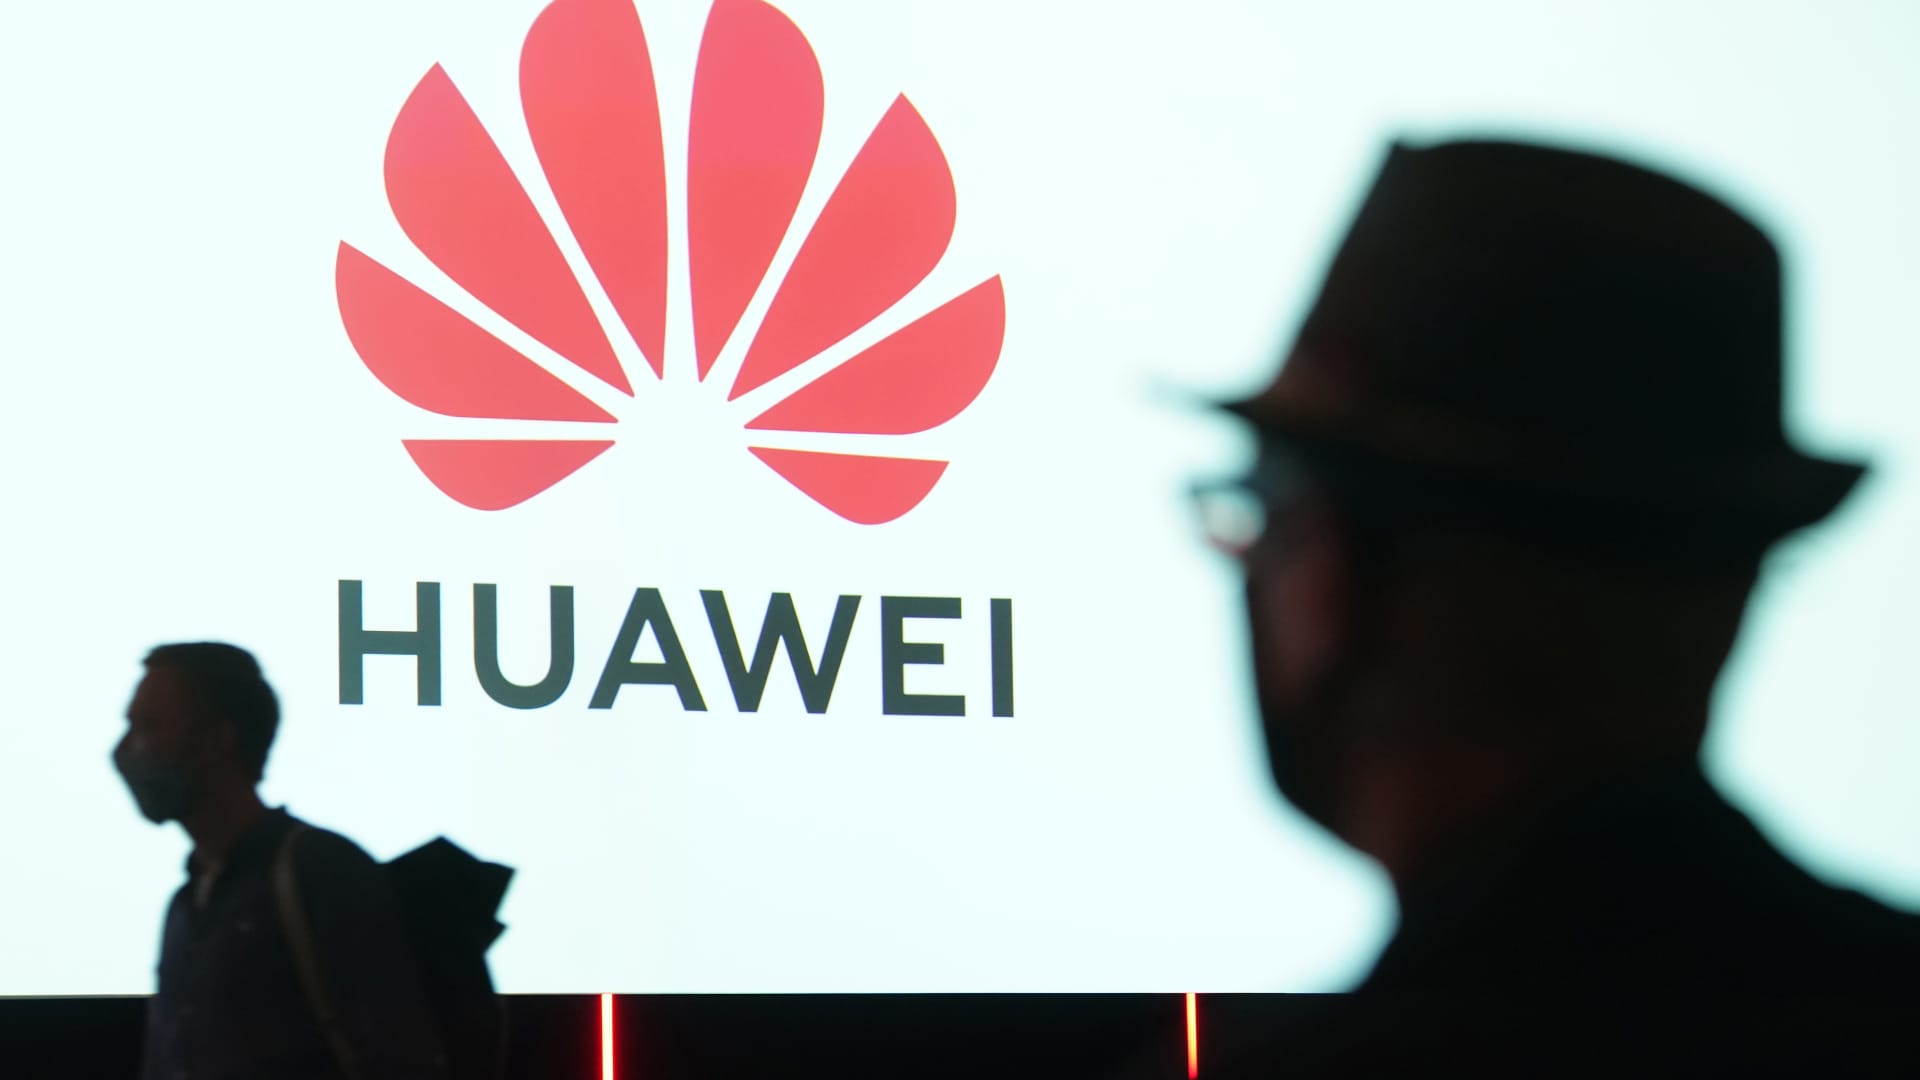 U.S. revokes some export licenses to sell chips to Huawei in a bid to curb China's tech power